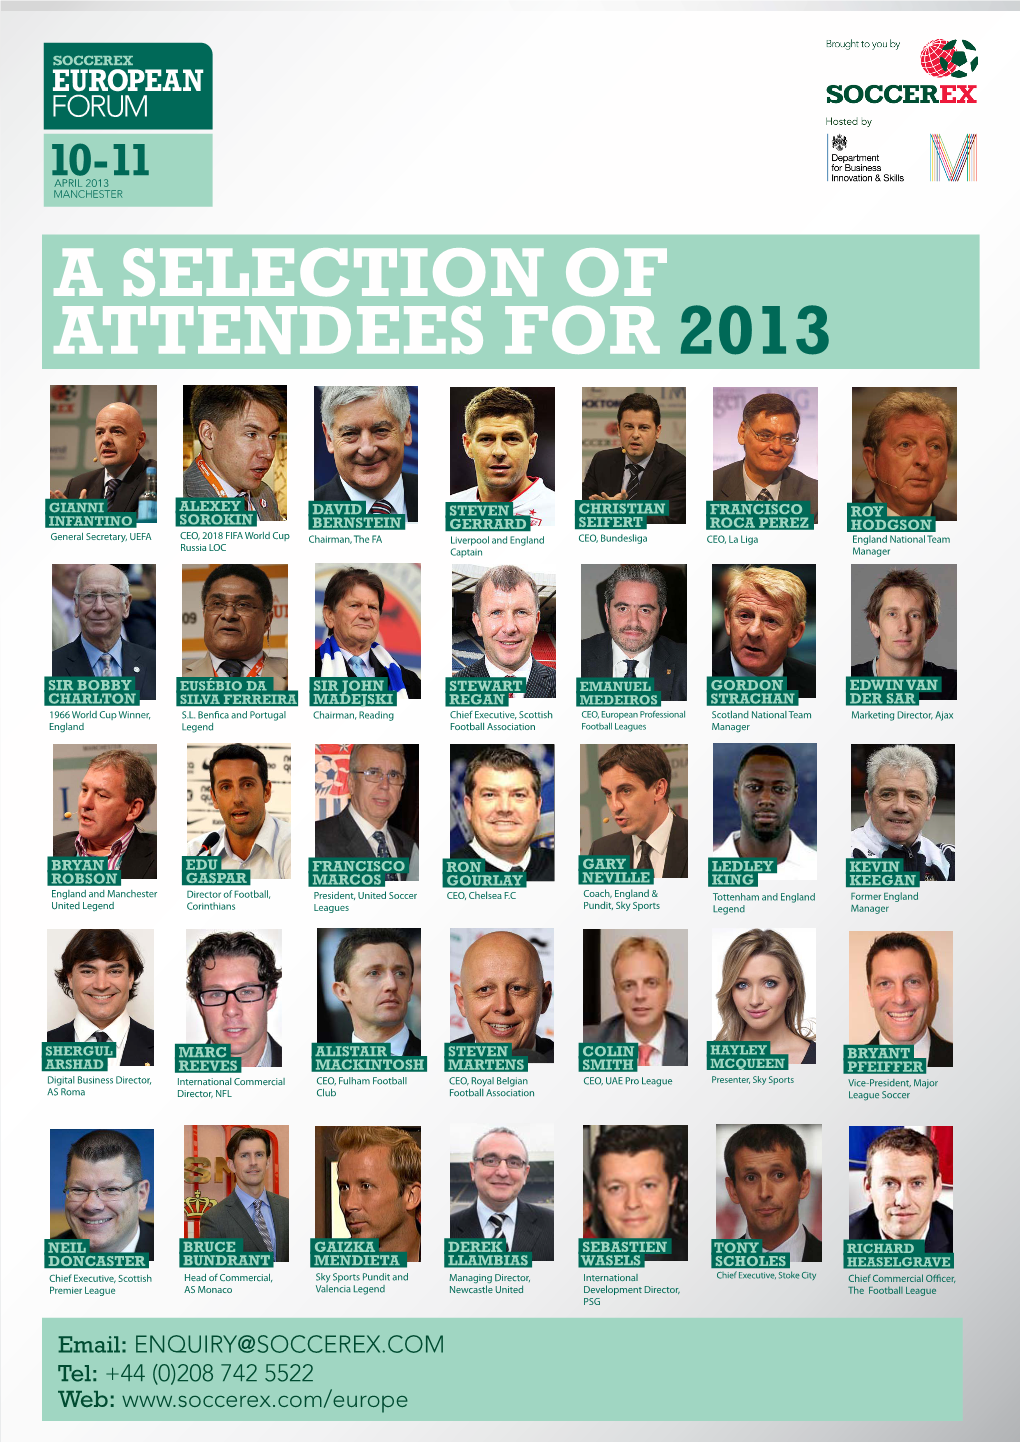 A Selection of Attendees for 2013